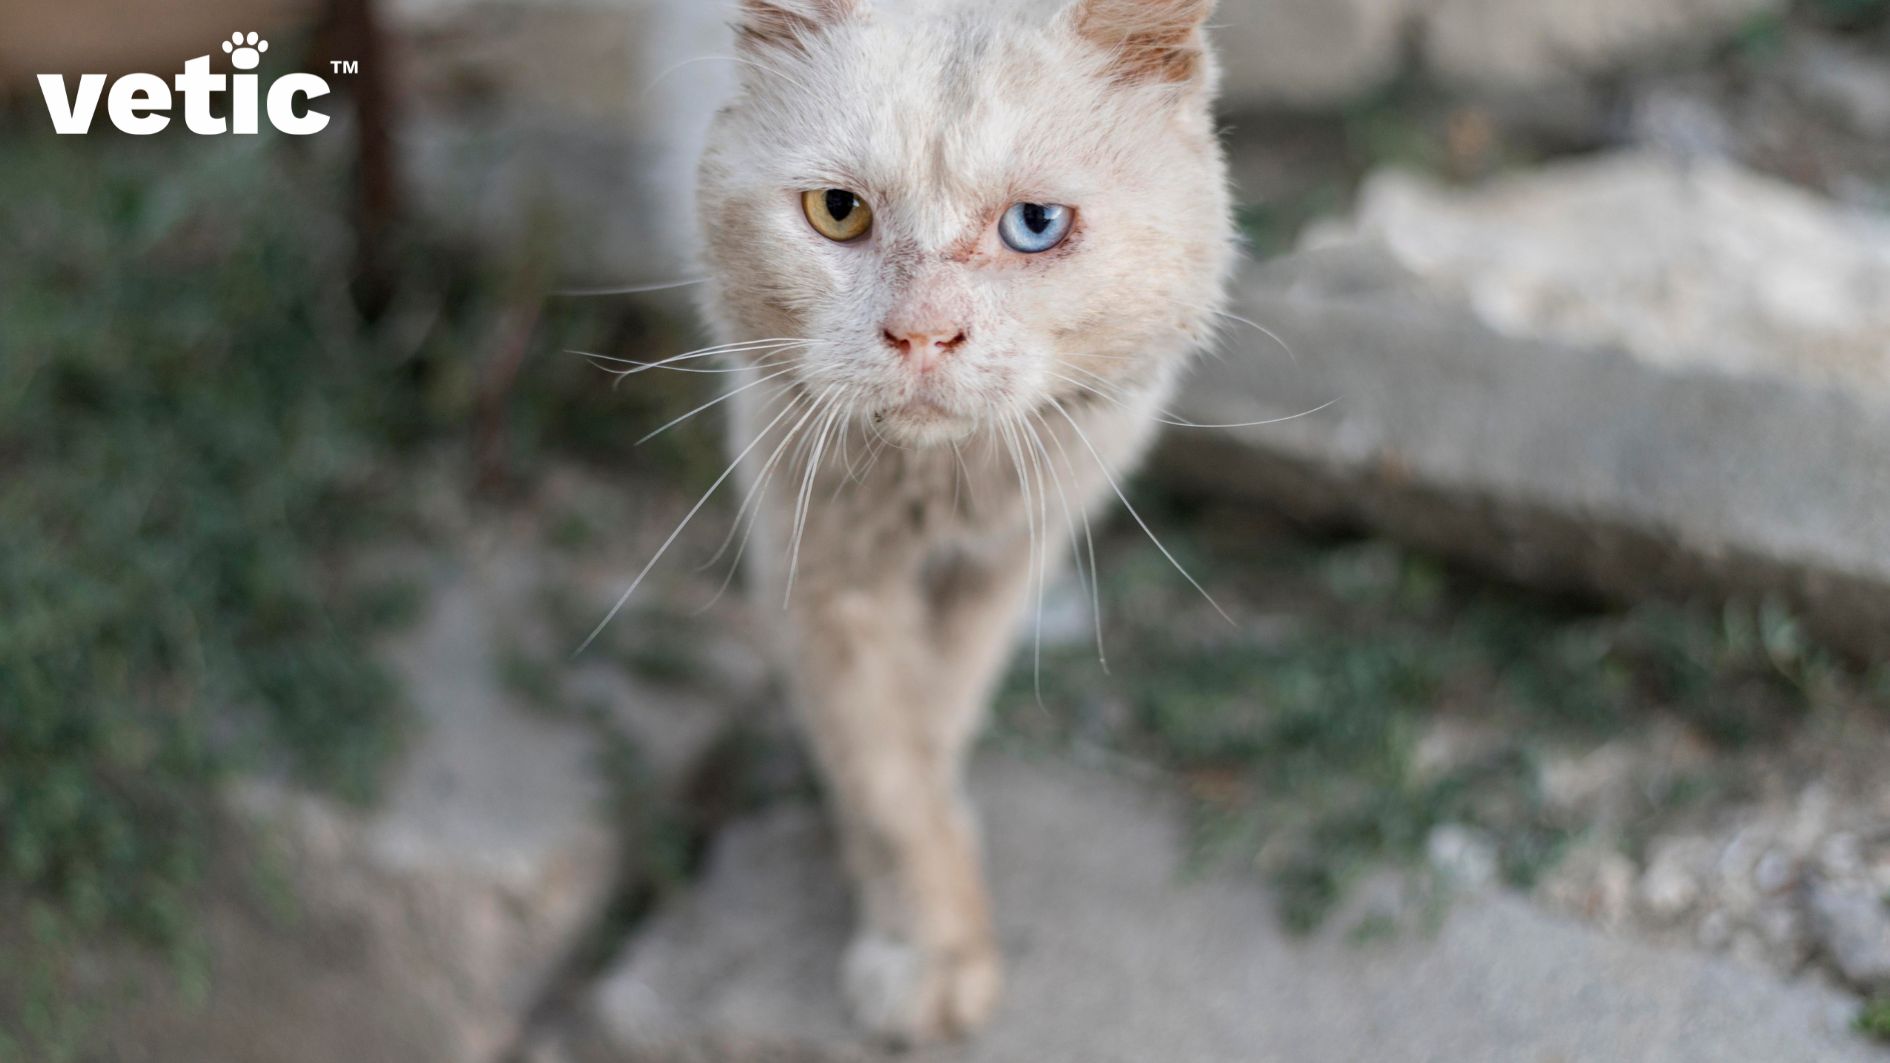 A dirty white cat with just the face in focus and the left front paw visible, looking up at the camera. The cat has heterochromia - two different colored eyes (one blue and one yellow). The cat looks scraggly. Worms in cats can make them look scraggly and malnourished like this white male. Deworming your cat may change the entire fur quality and health of a cat for the better. 